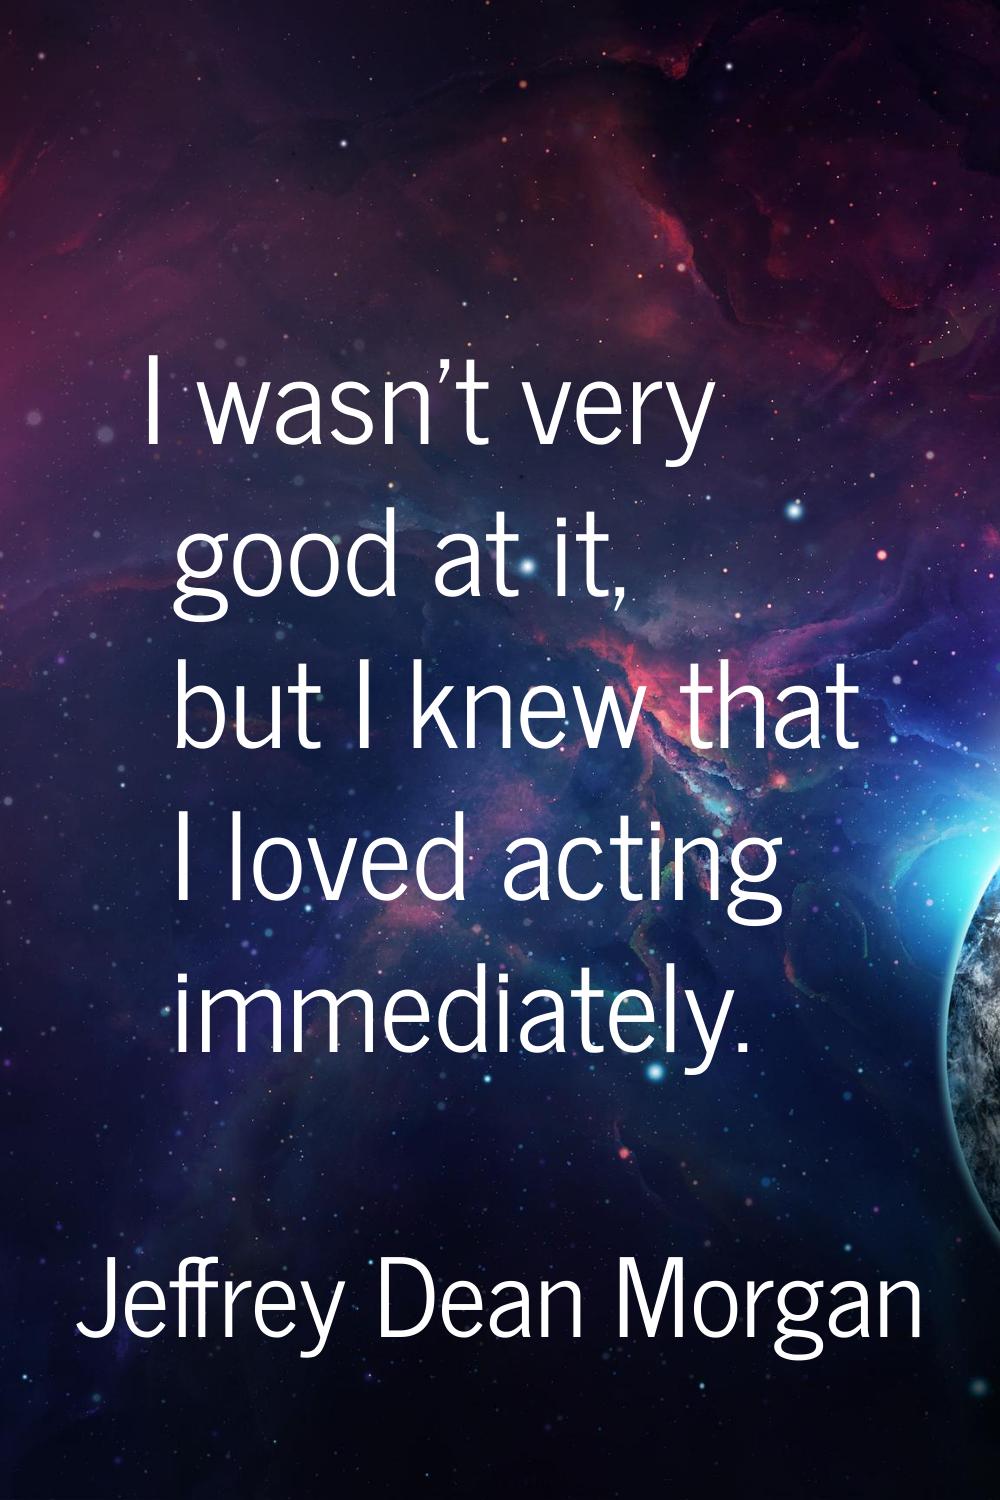 I wasn't very good at it, but I knew that I loved acting immediately.